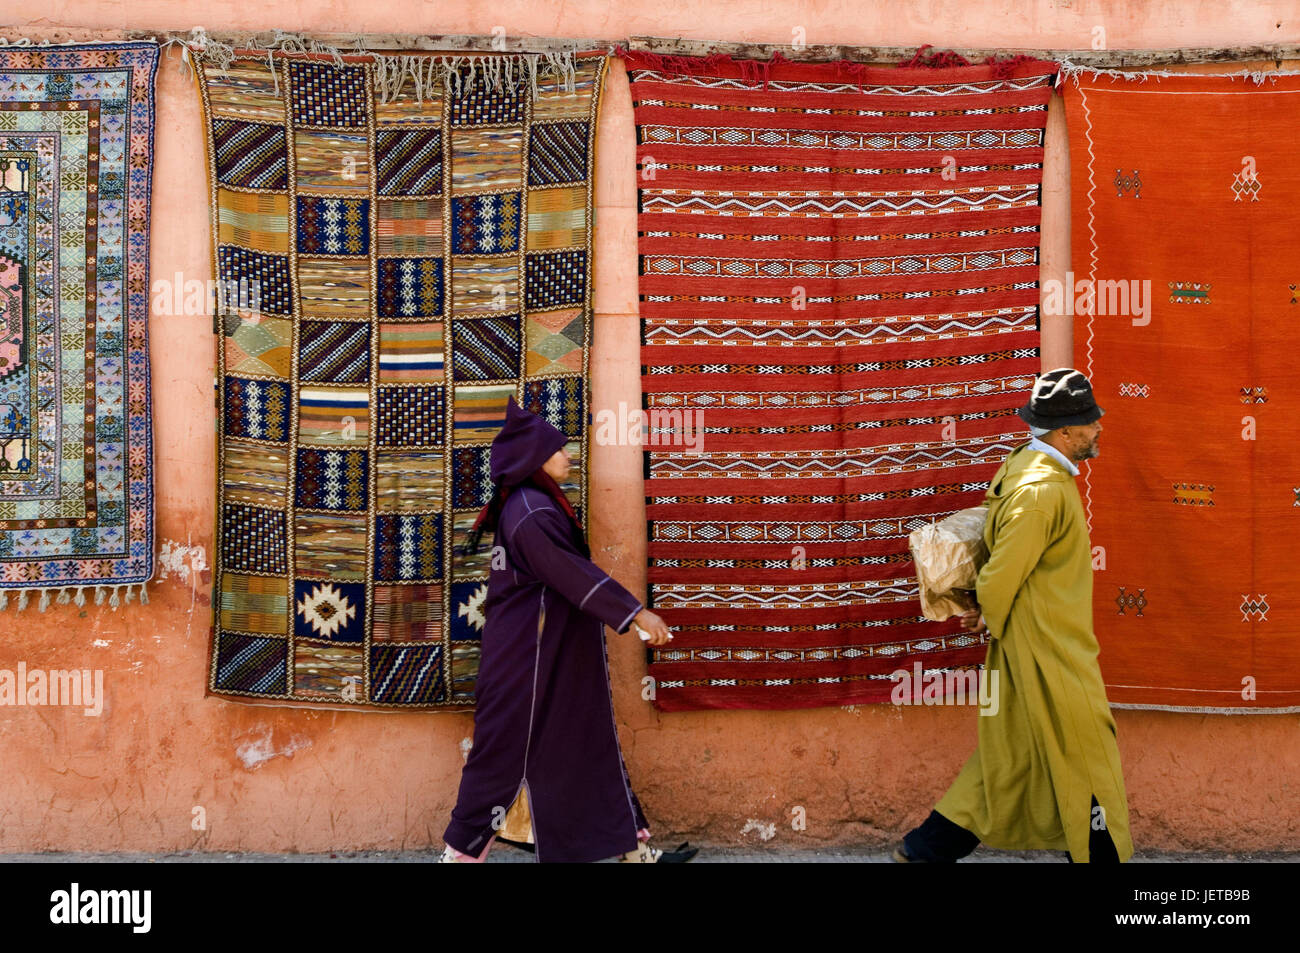 Morocco, Marrakech, Souk, defensive wall, carpets, hang, passers-by, at the side, no model release, Africa, North Africa, destination, culture, trade, economy, market, textiles, people, locals, caftan, couple, go, distance, follow, Stock Photo